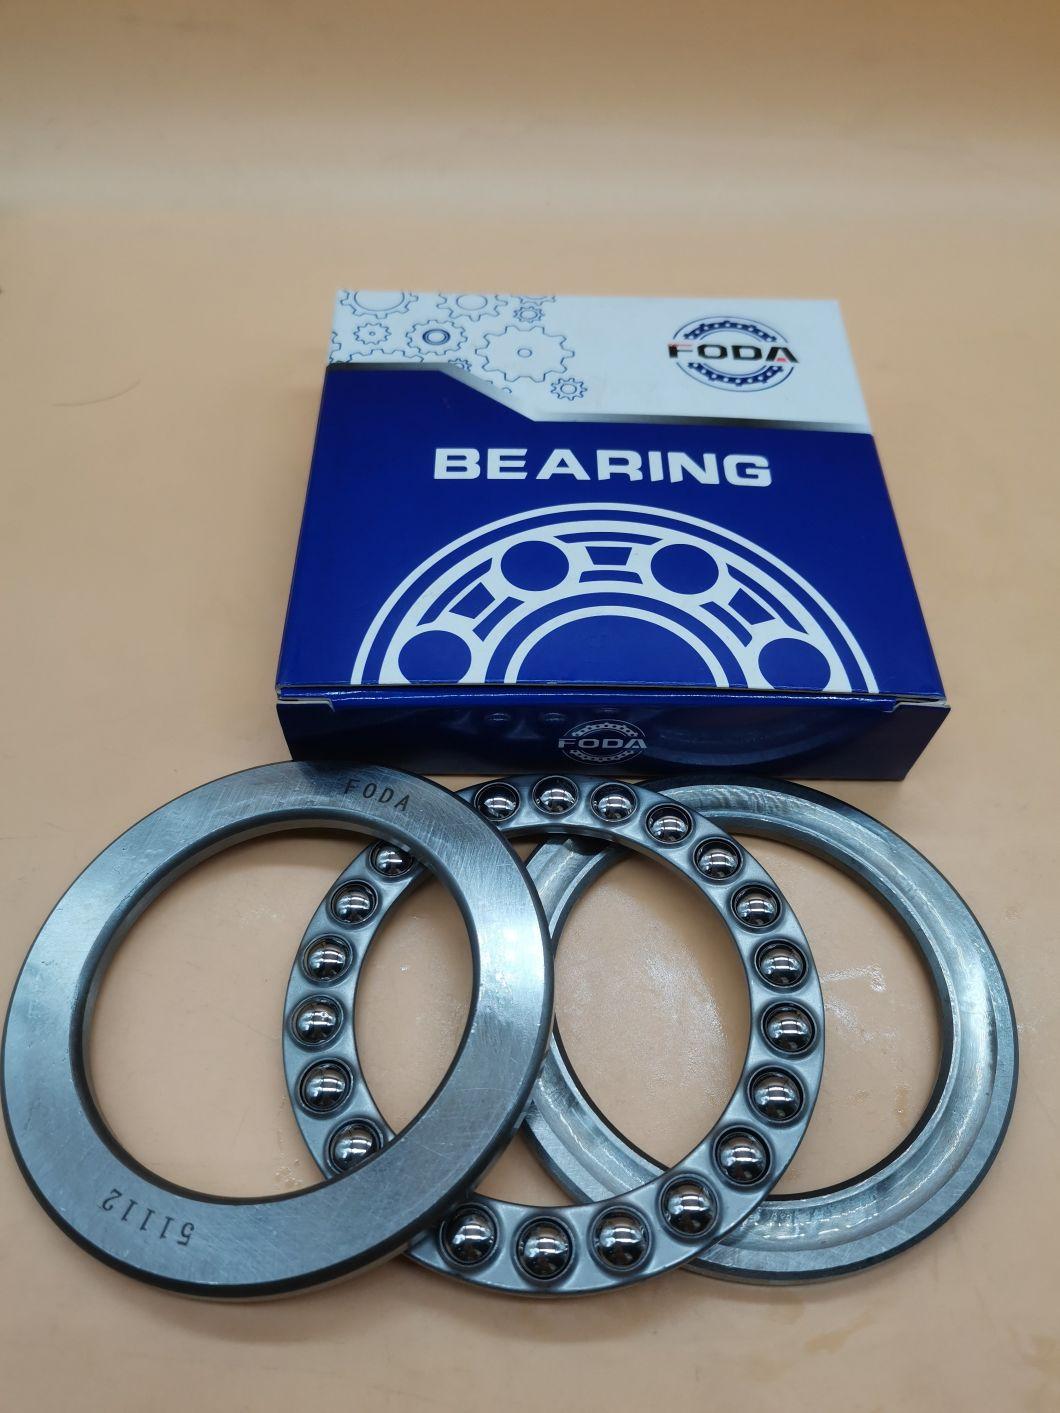 Bicycle Parts/Low Speed Reducer/Foda High Quality Bearings Instead of Koyo Bearings/Thrust Ball Bearings for Crane Hooks/Thrust Ball Bearings of 51310